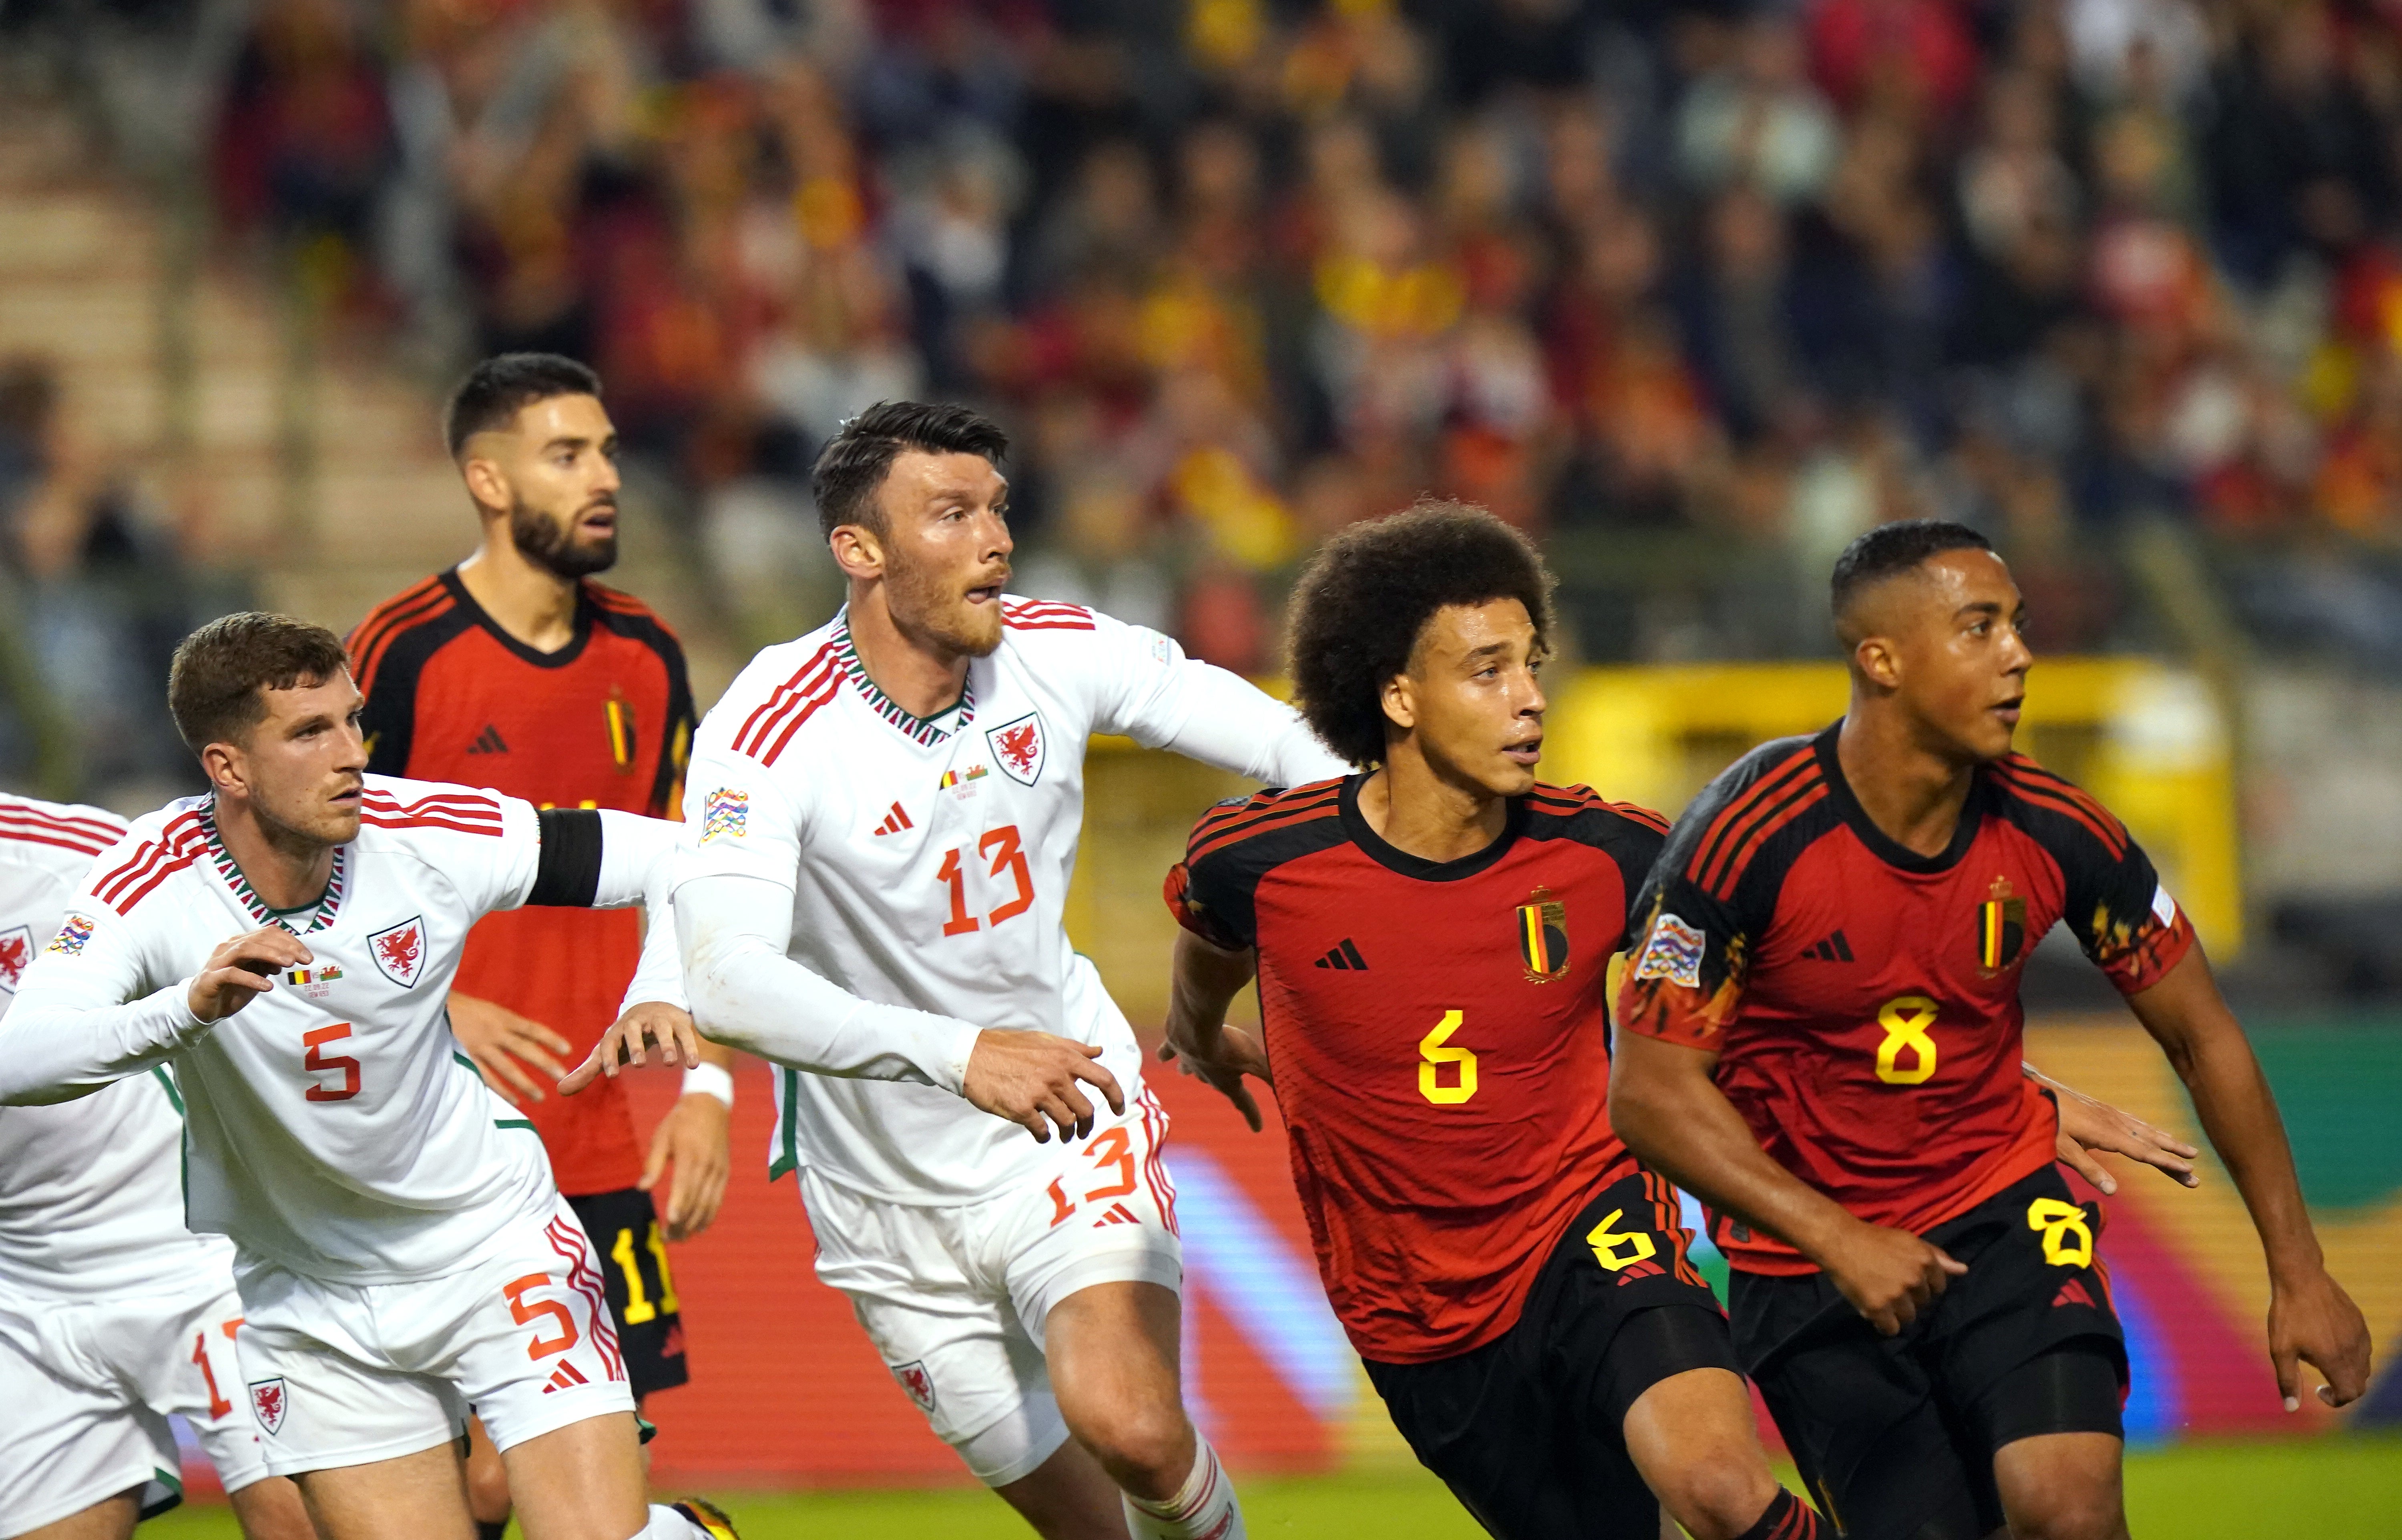 Wales’ Kieffer Moore and Belgium’s Axel Witsel wait for a free-kick to come in (Tim Goode/PA)